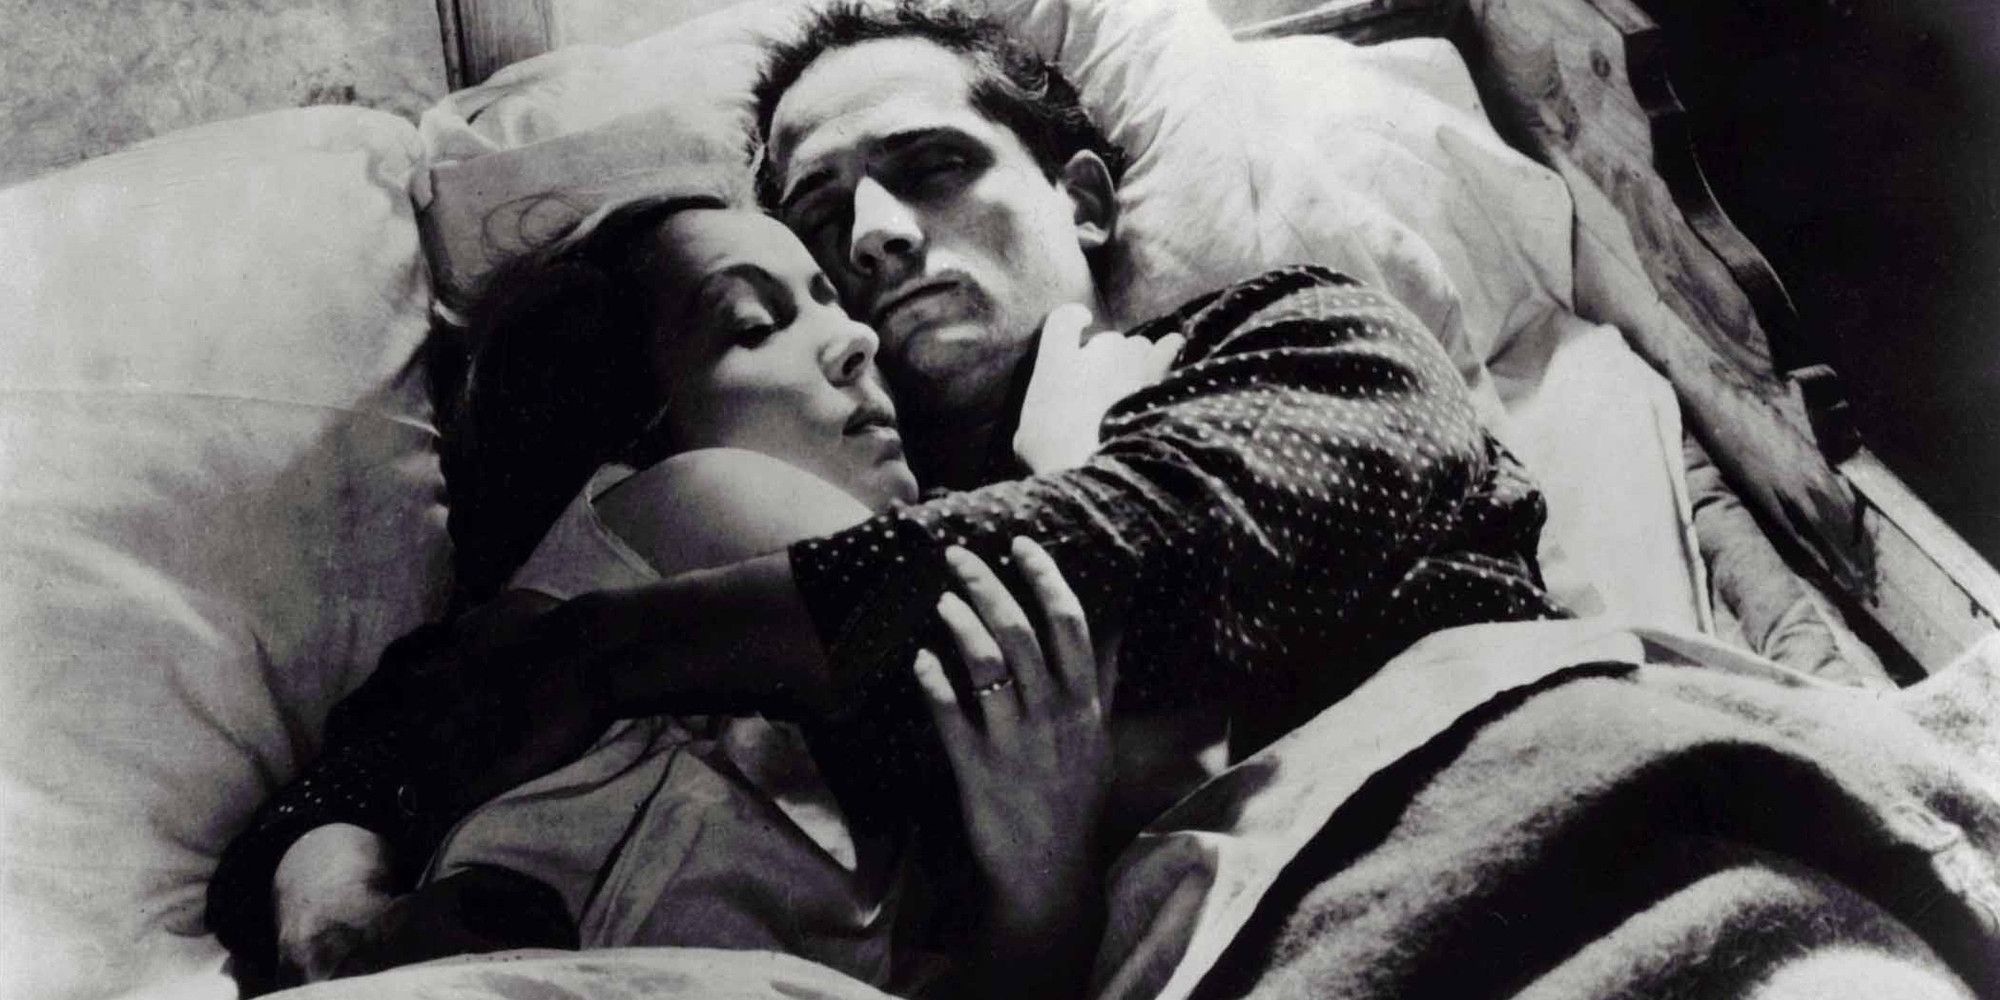 A couple lying together in a bed in the film L'Atalante